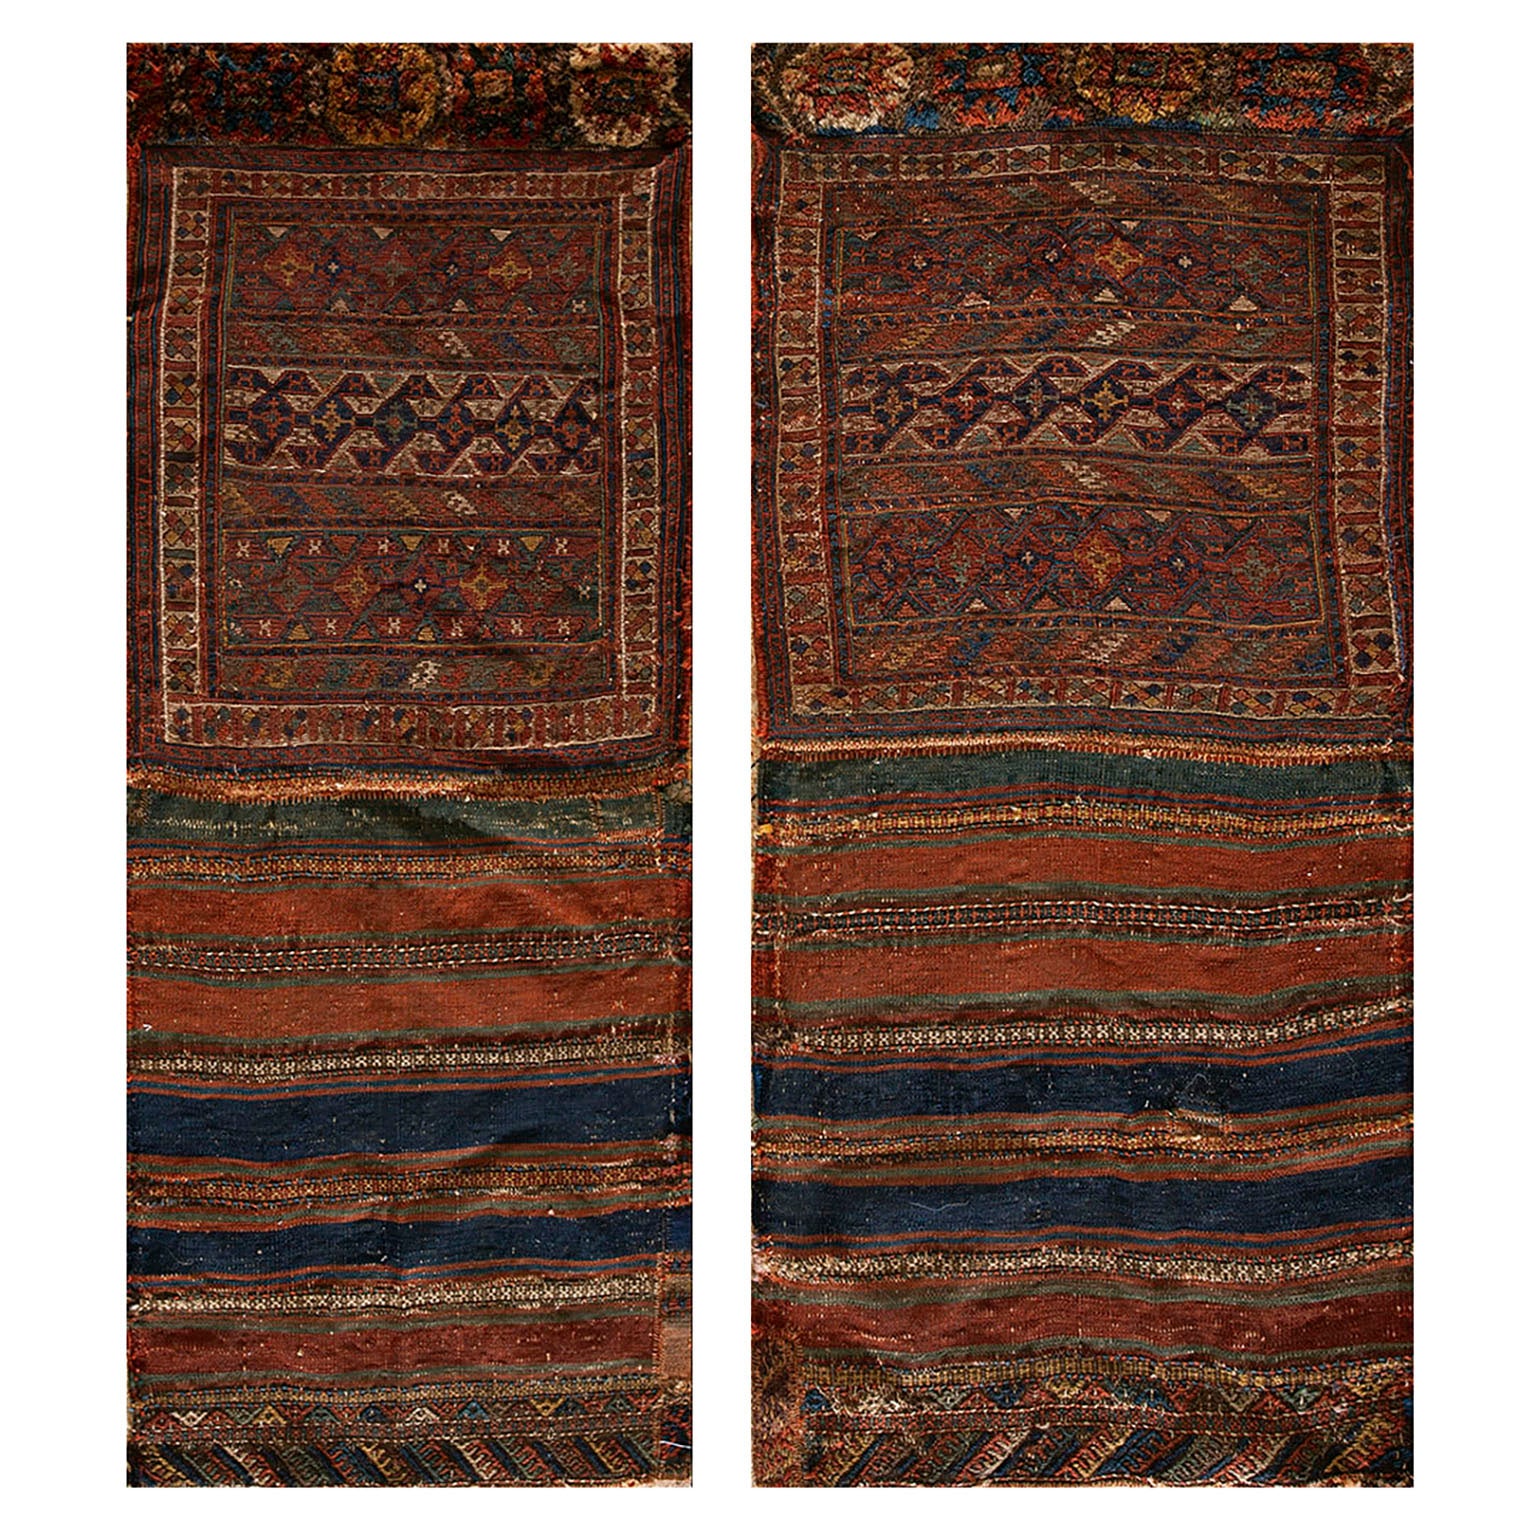 Early 20th Century Pair of Persian Sumak Carpets ( 1'8" x 3'5" - 51 x 104 ) For Sale